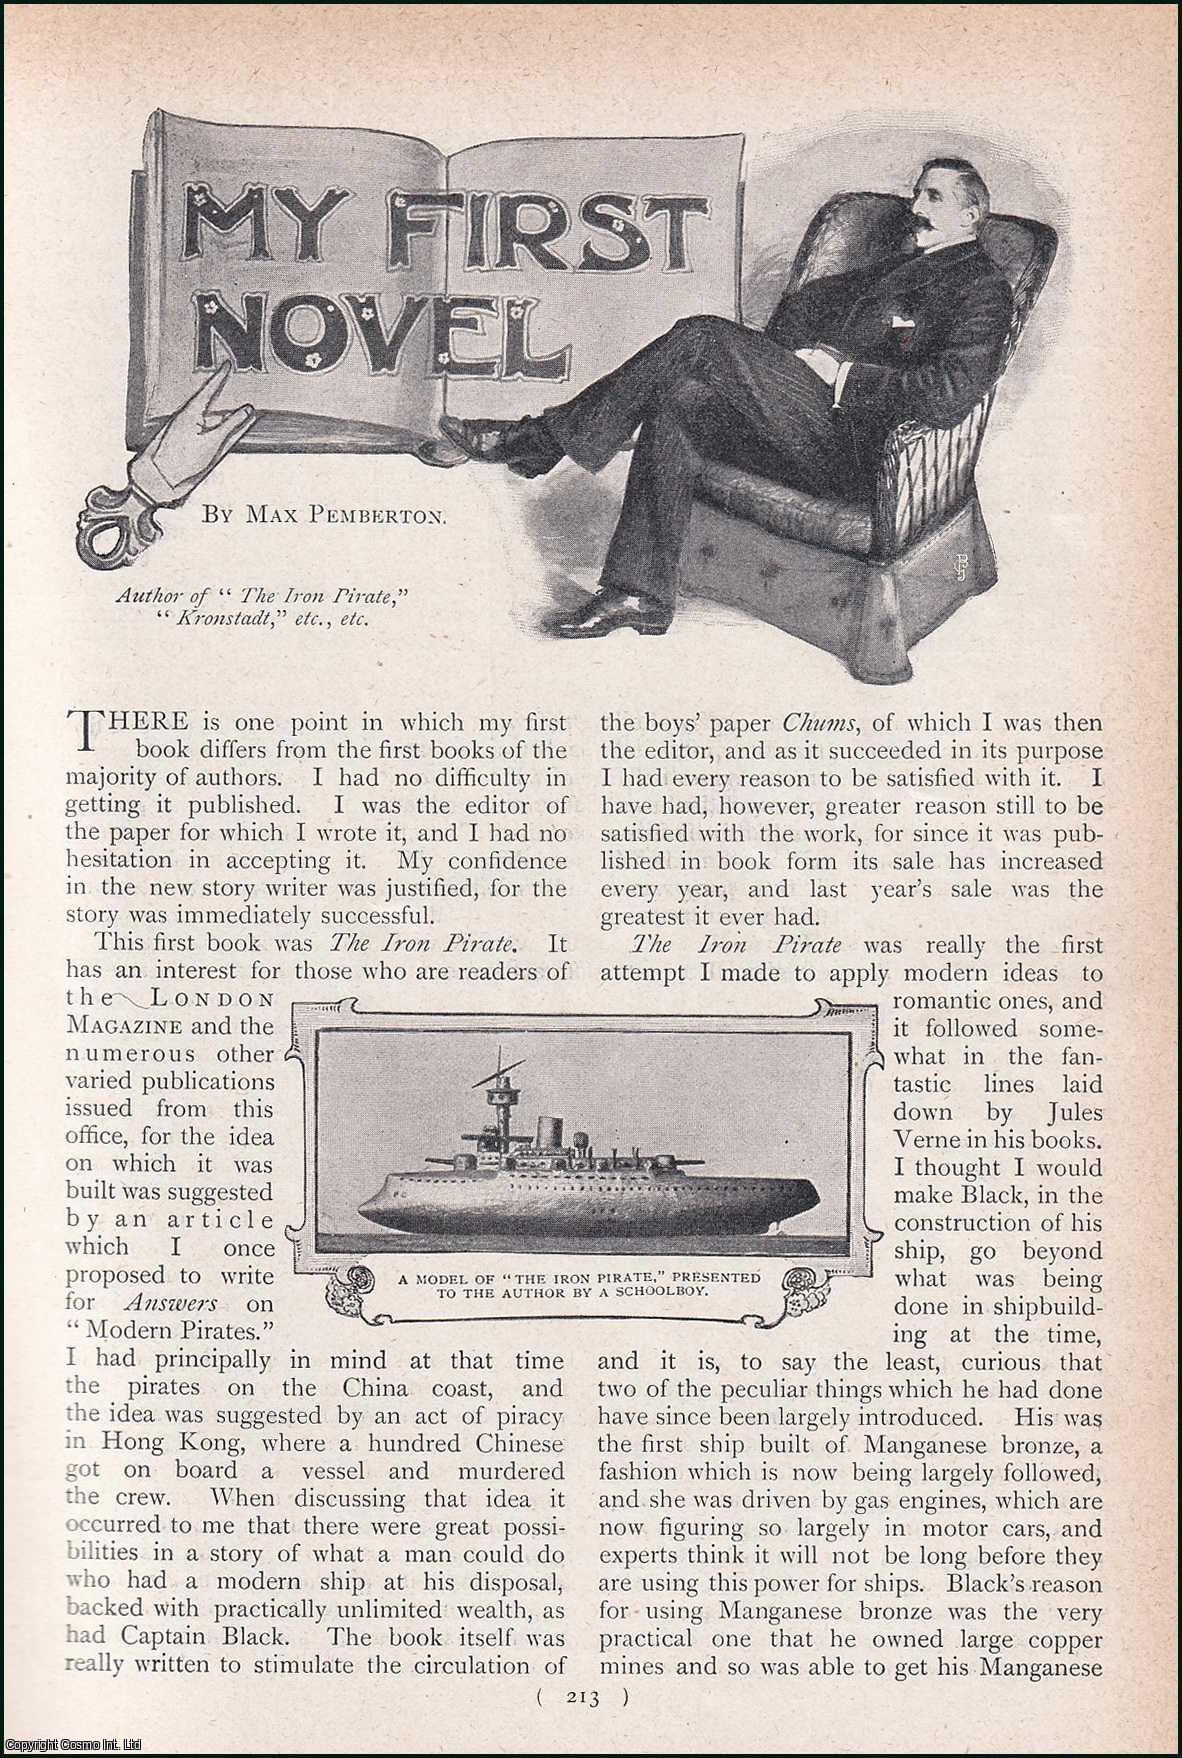 Max Pemberton - The Iron Pirate : my first novel. An uncommon original article from the Harmsworth London Magazine, 1902.